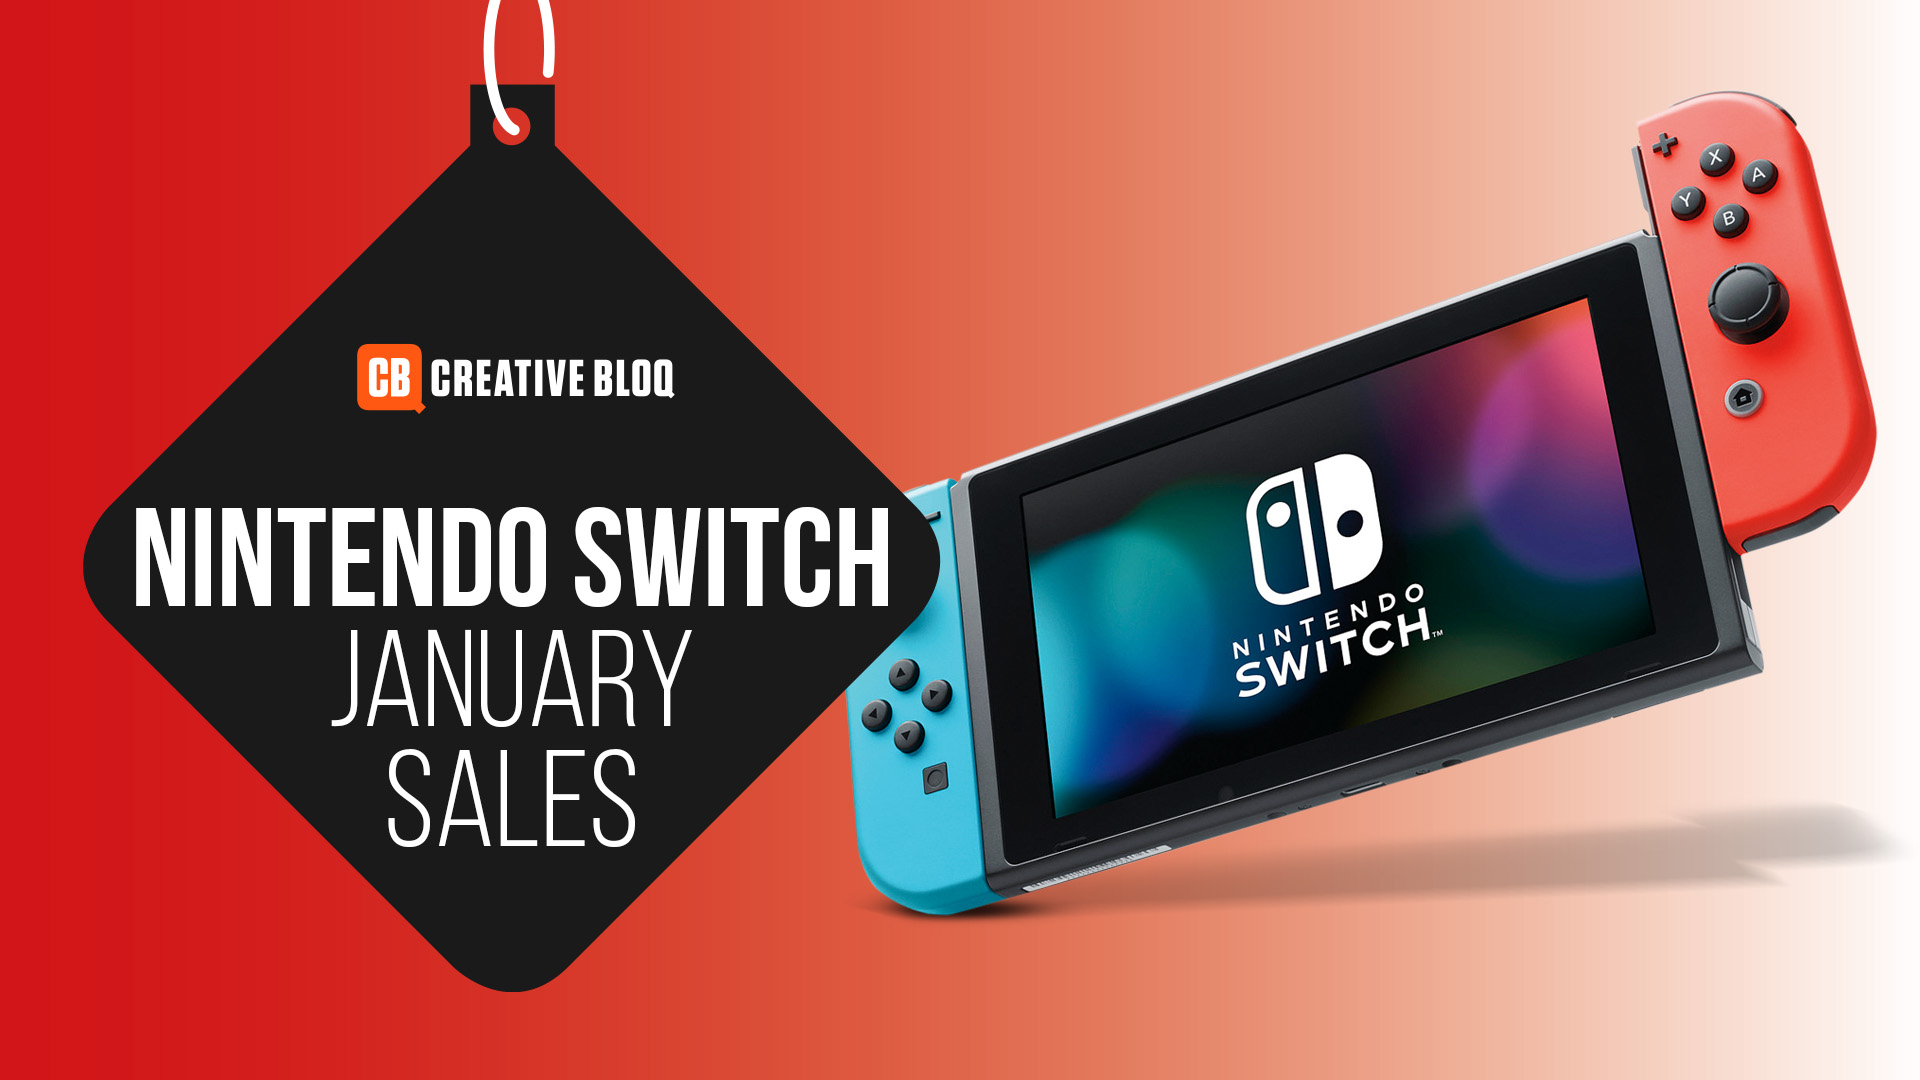 Nintendo Switch Black Friday deals live blog: the best offers on